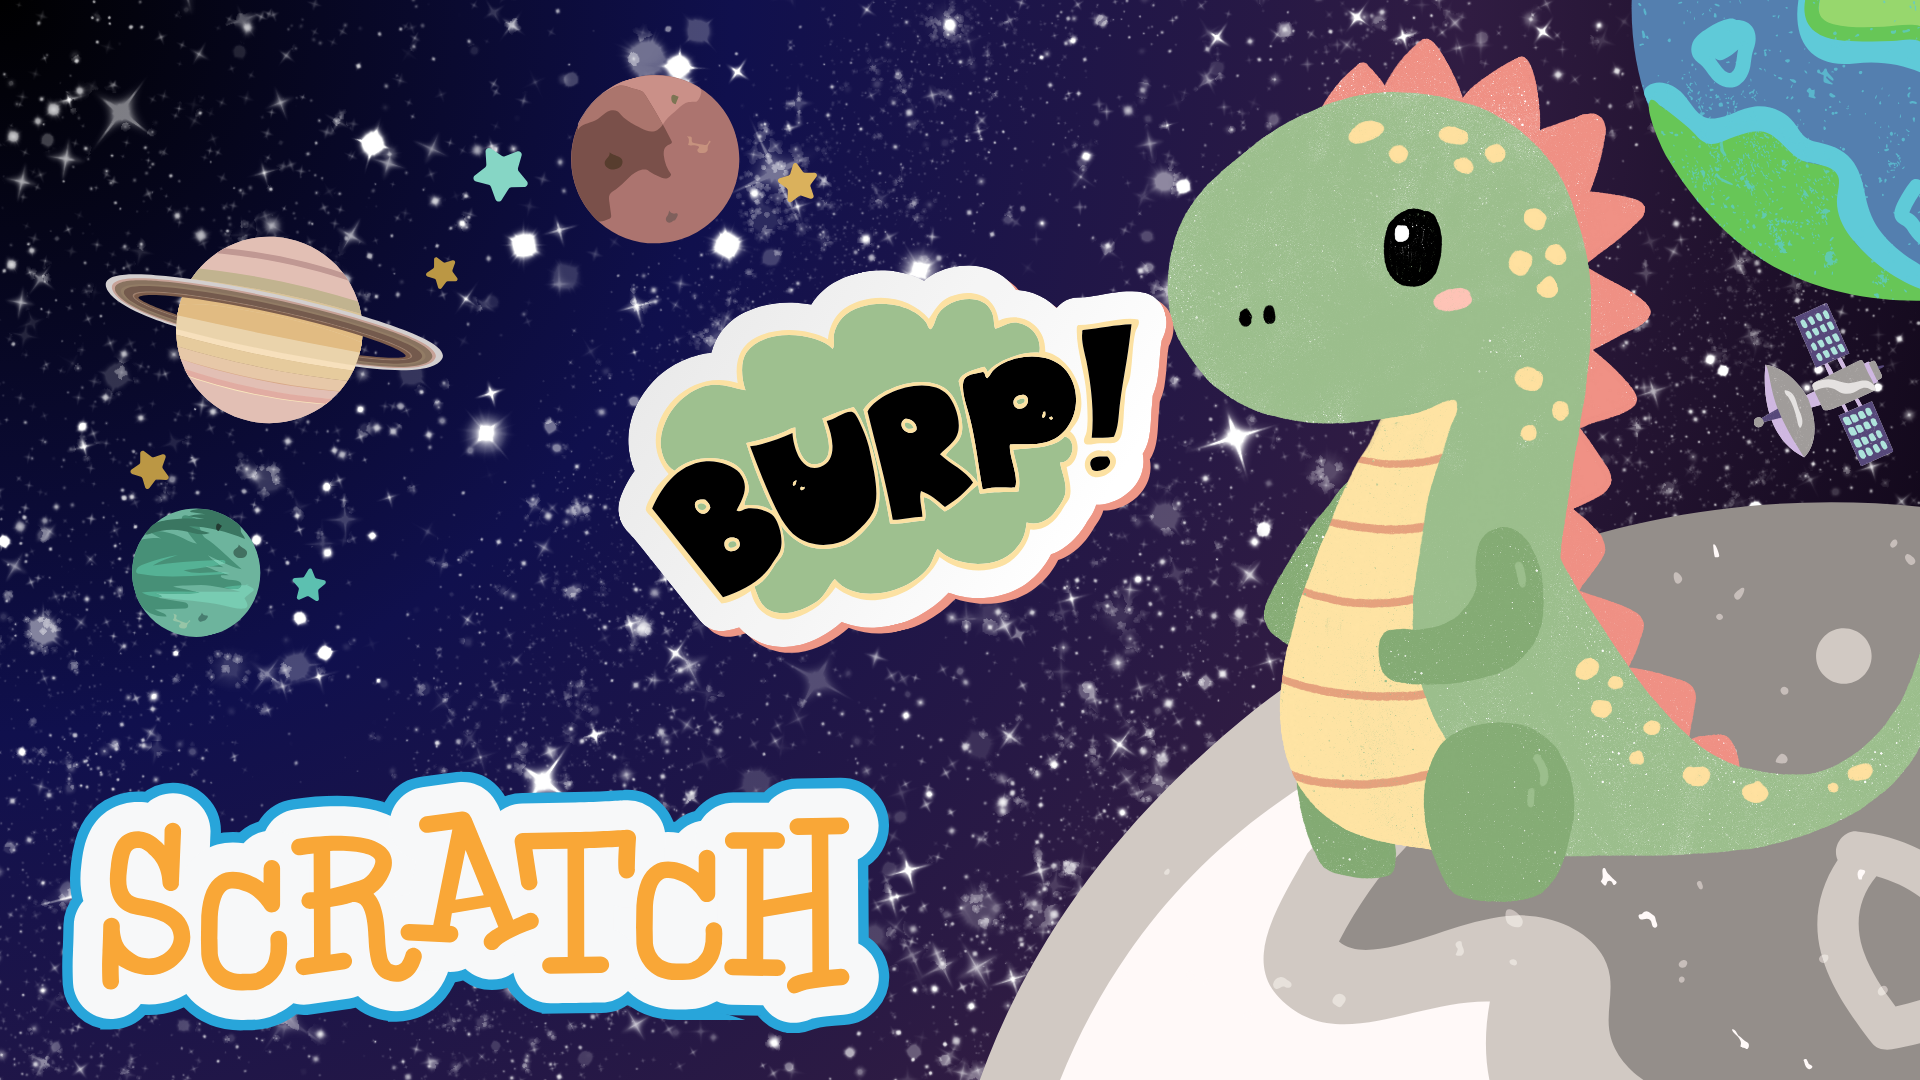 A cartoon dinosaur sitting on a planet in outer space is burping. The logo for Scratch coding is included.